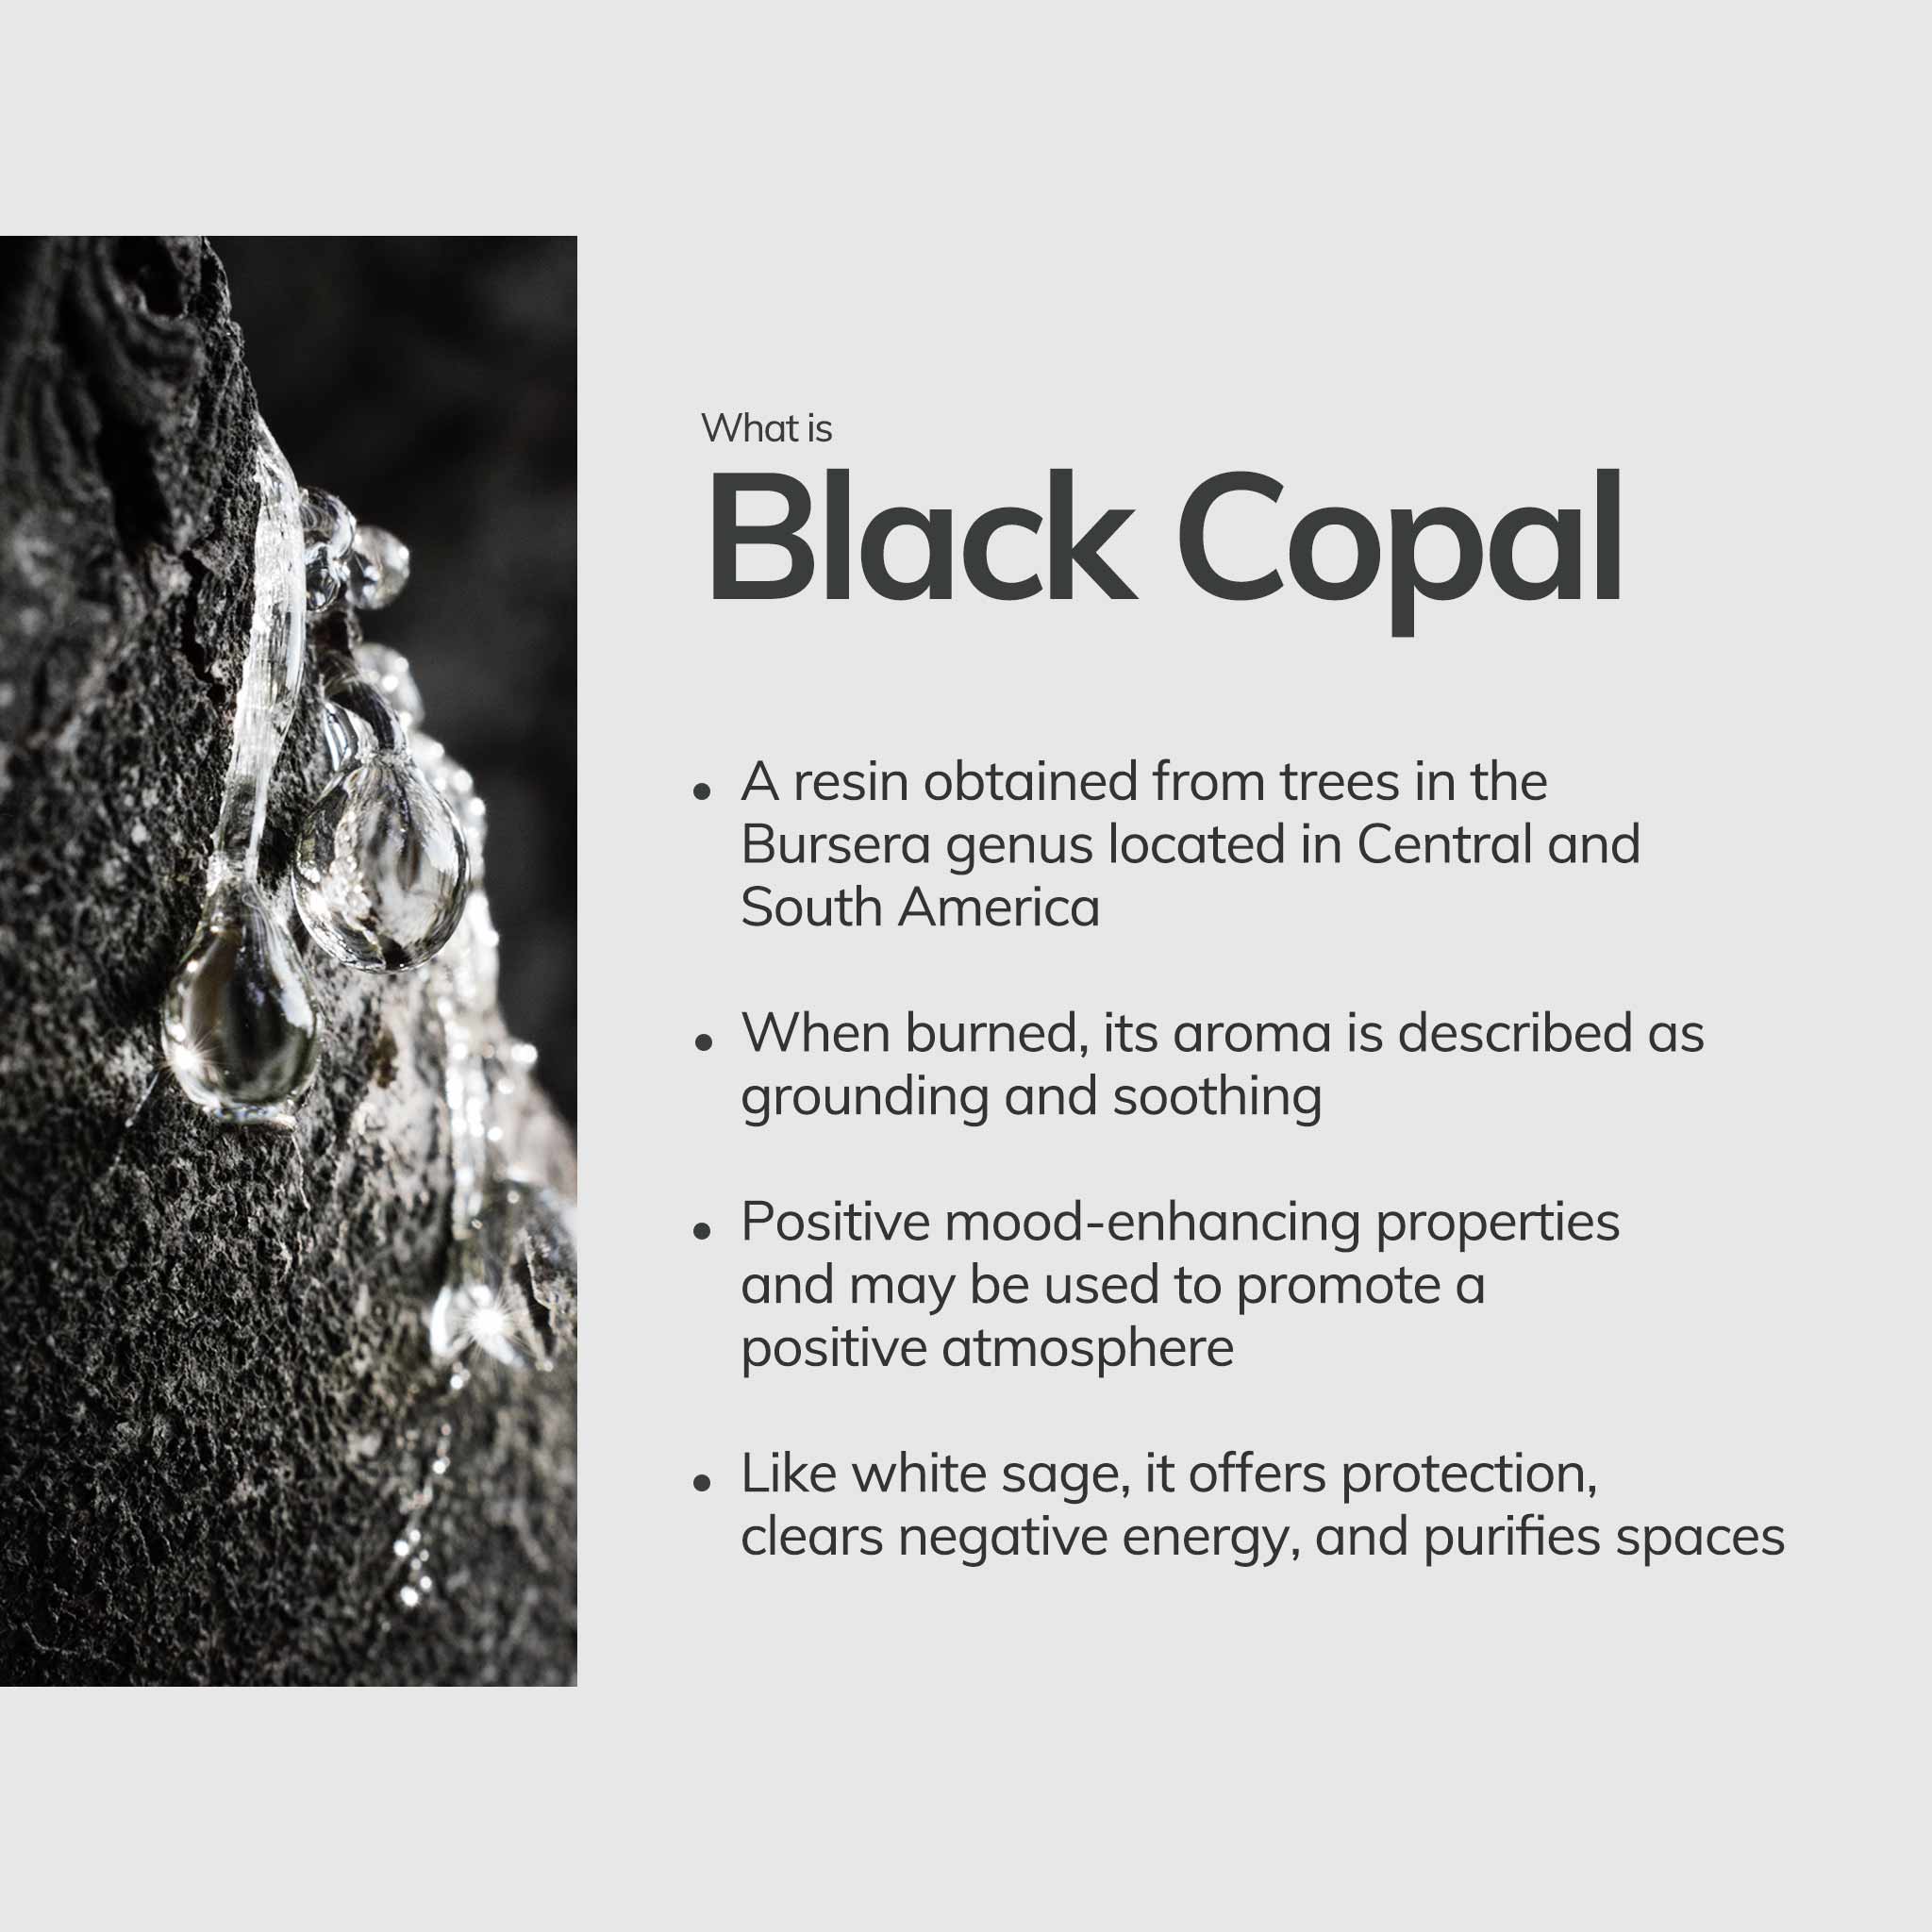 Left: Black copal resin from a tree; Right: bullet list telling what is black copal is used for.